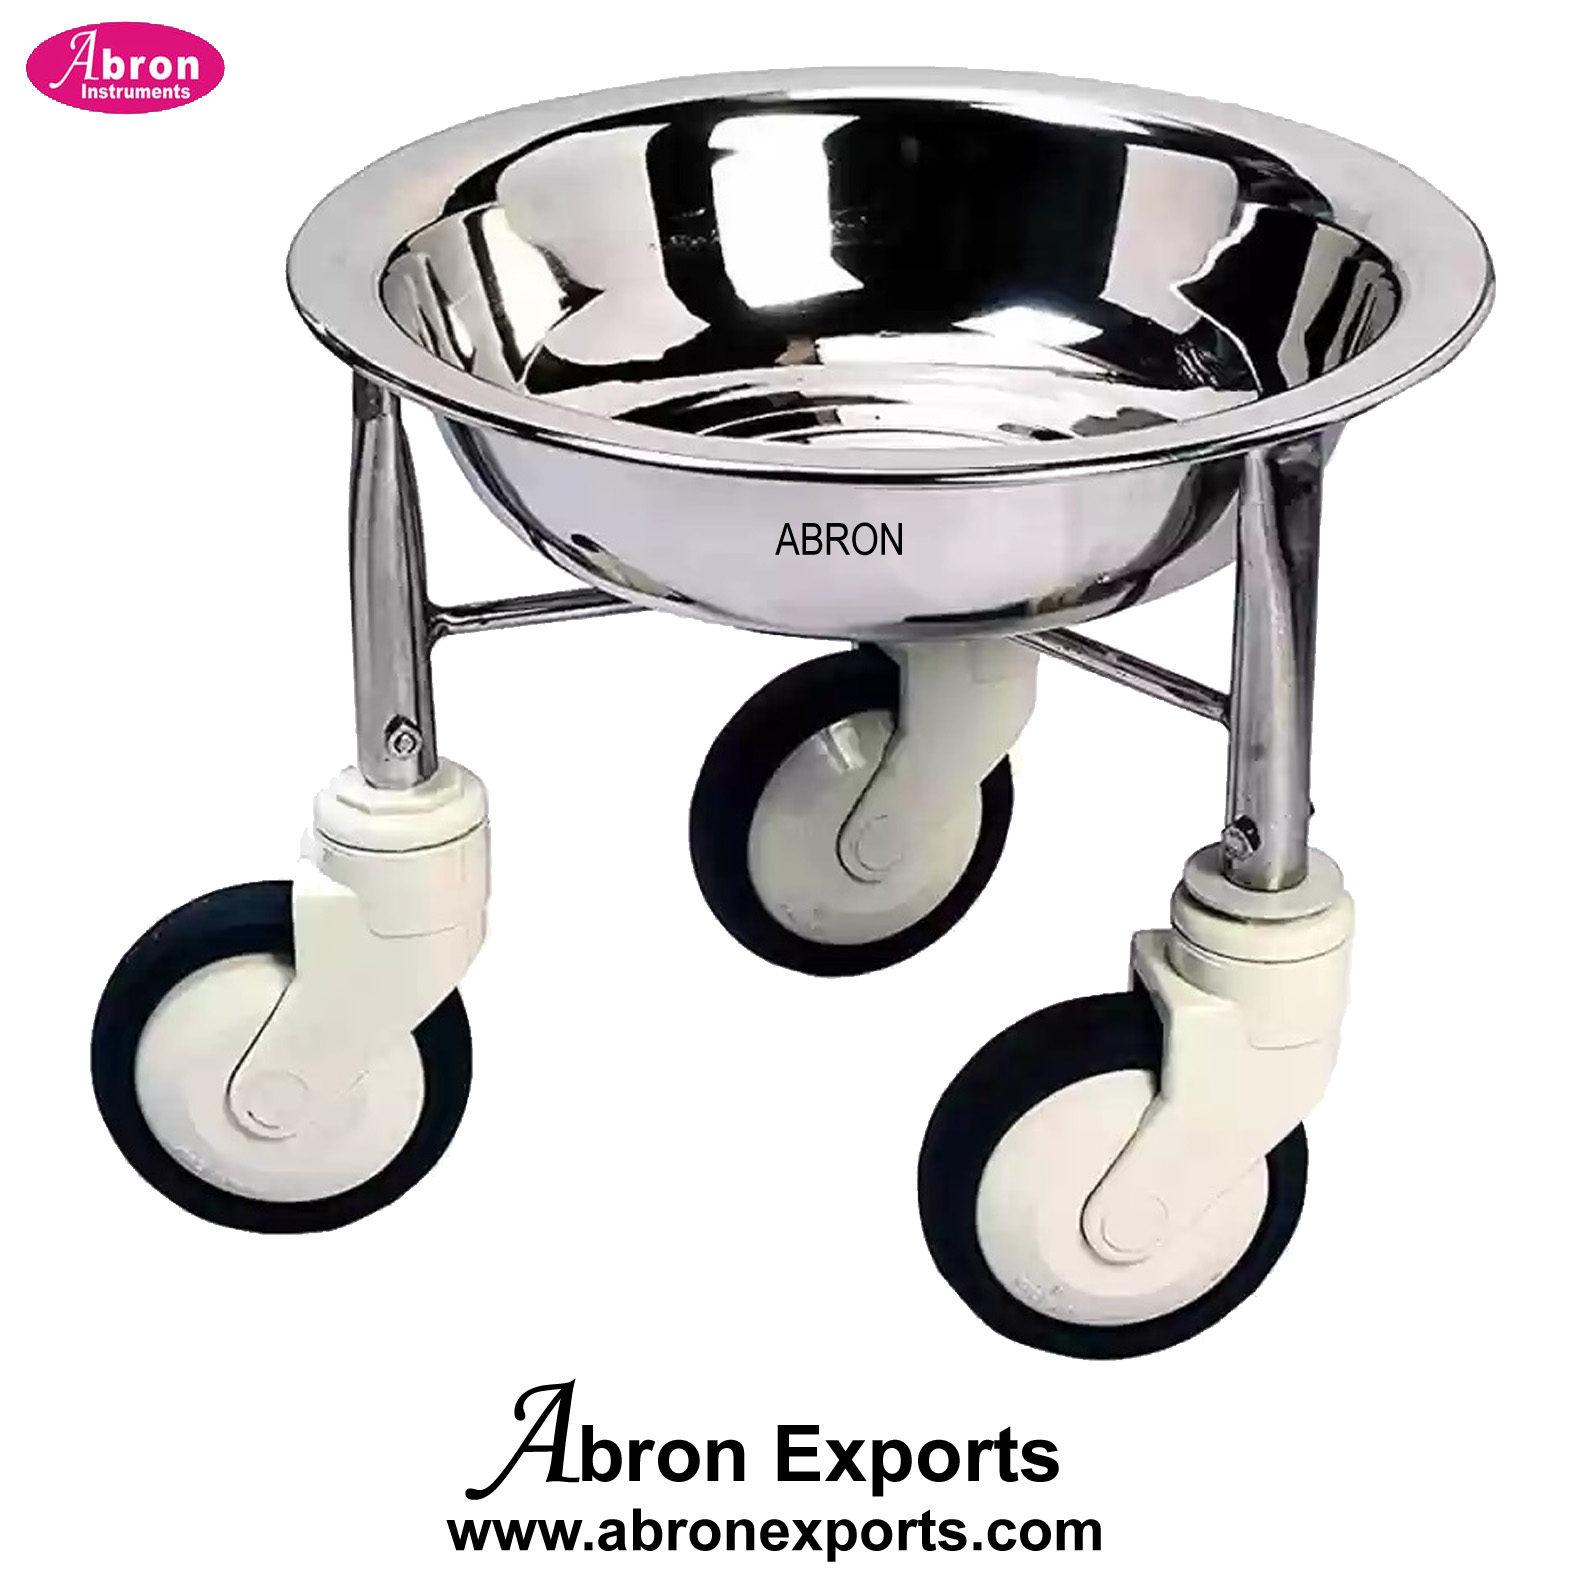 Hospital Holloware SS Kick Bucket & Bowl Stand Wash Basin With Wheels SS Stainlesss Steel Table Type Abron ABM-2314STK 